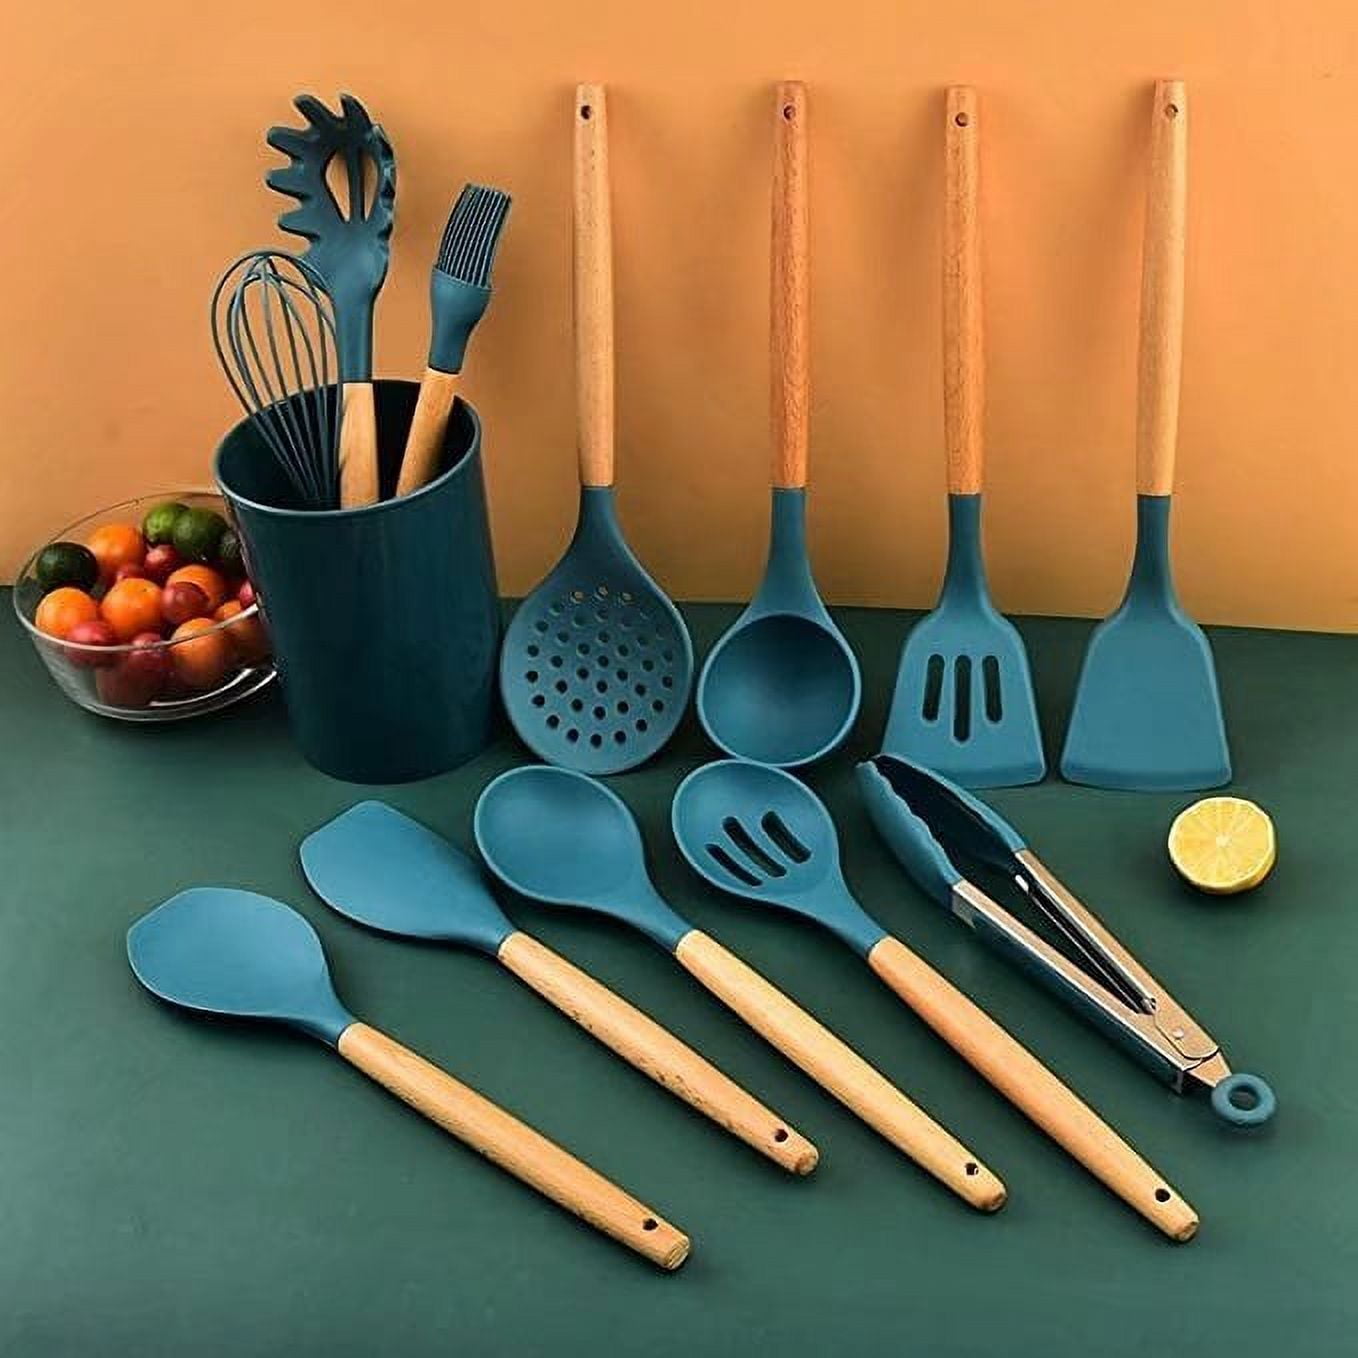 12 Pcs Silicone Kitchen Utensils Set with Holder Wooden Handles Heat Resistant & BPA Free & Non-Toxic(blue), Size: 4.92